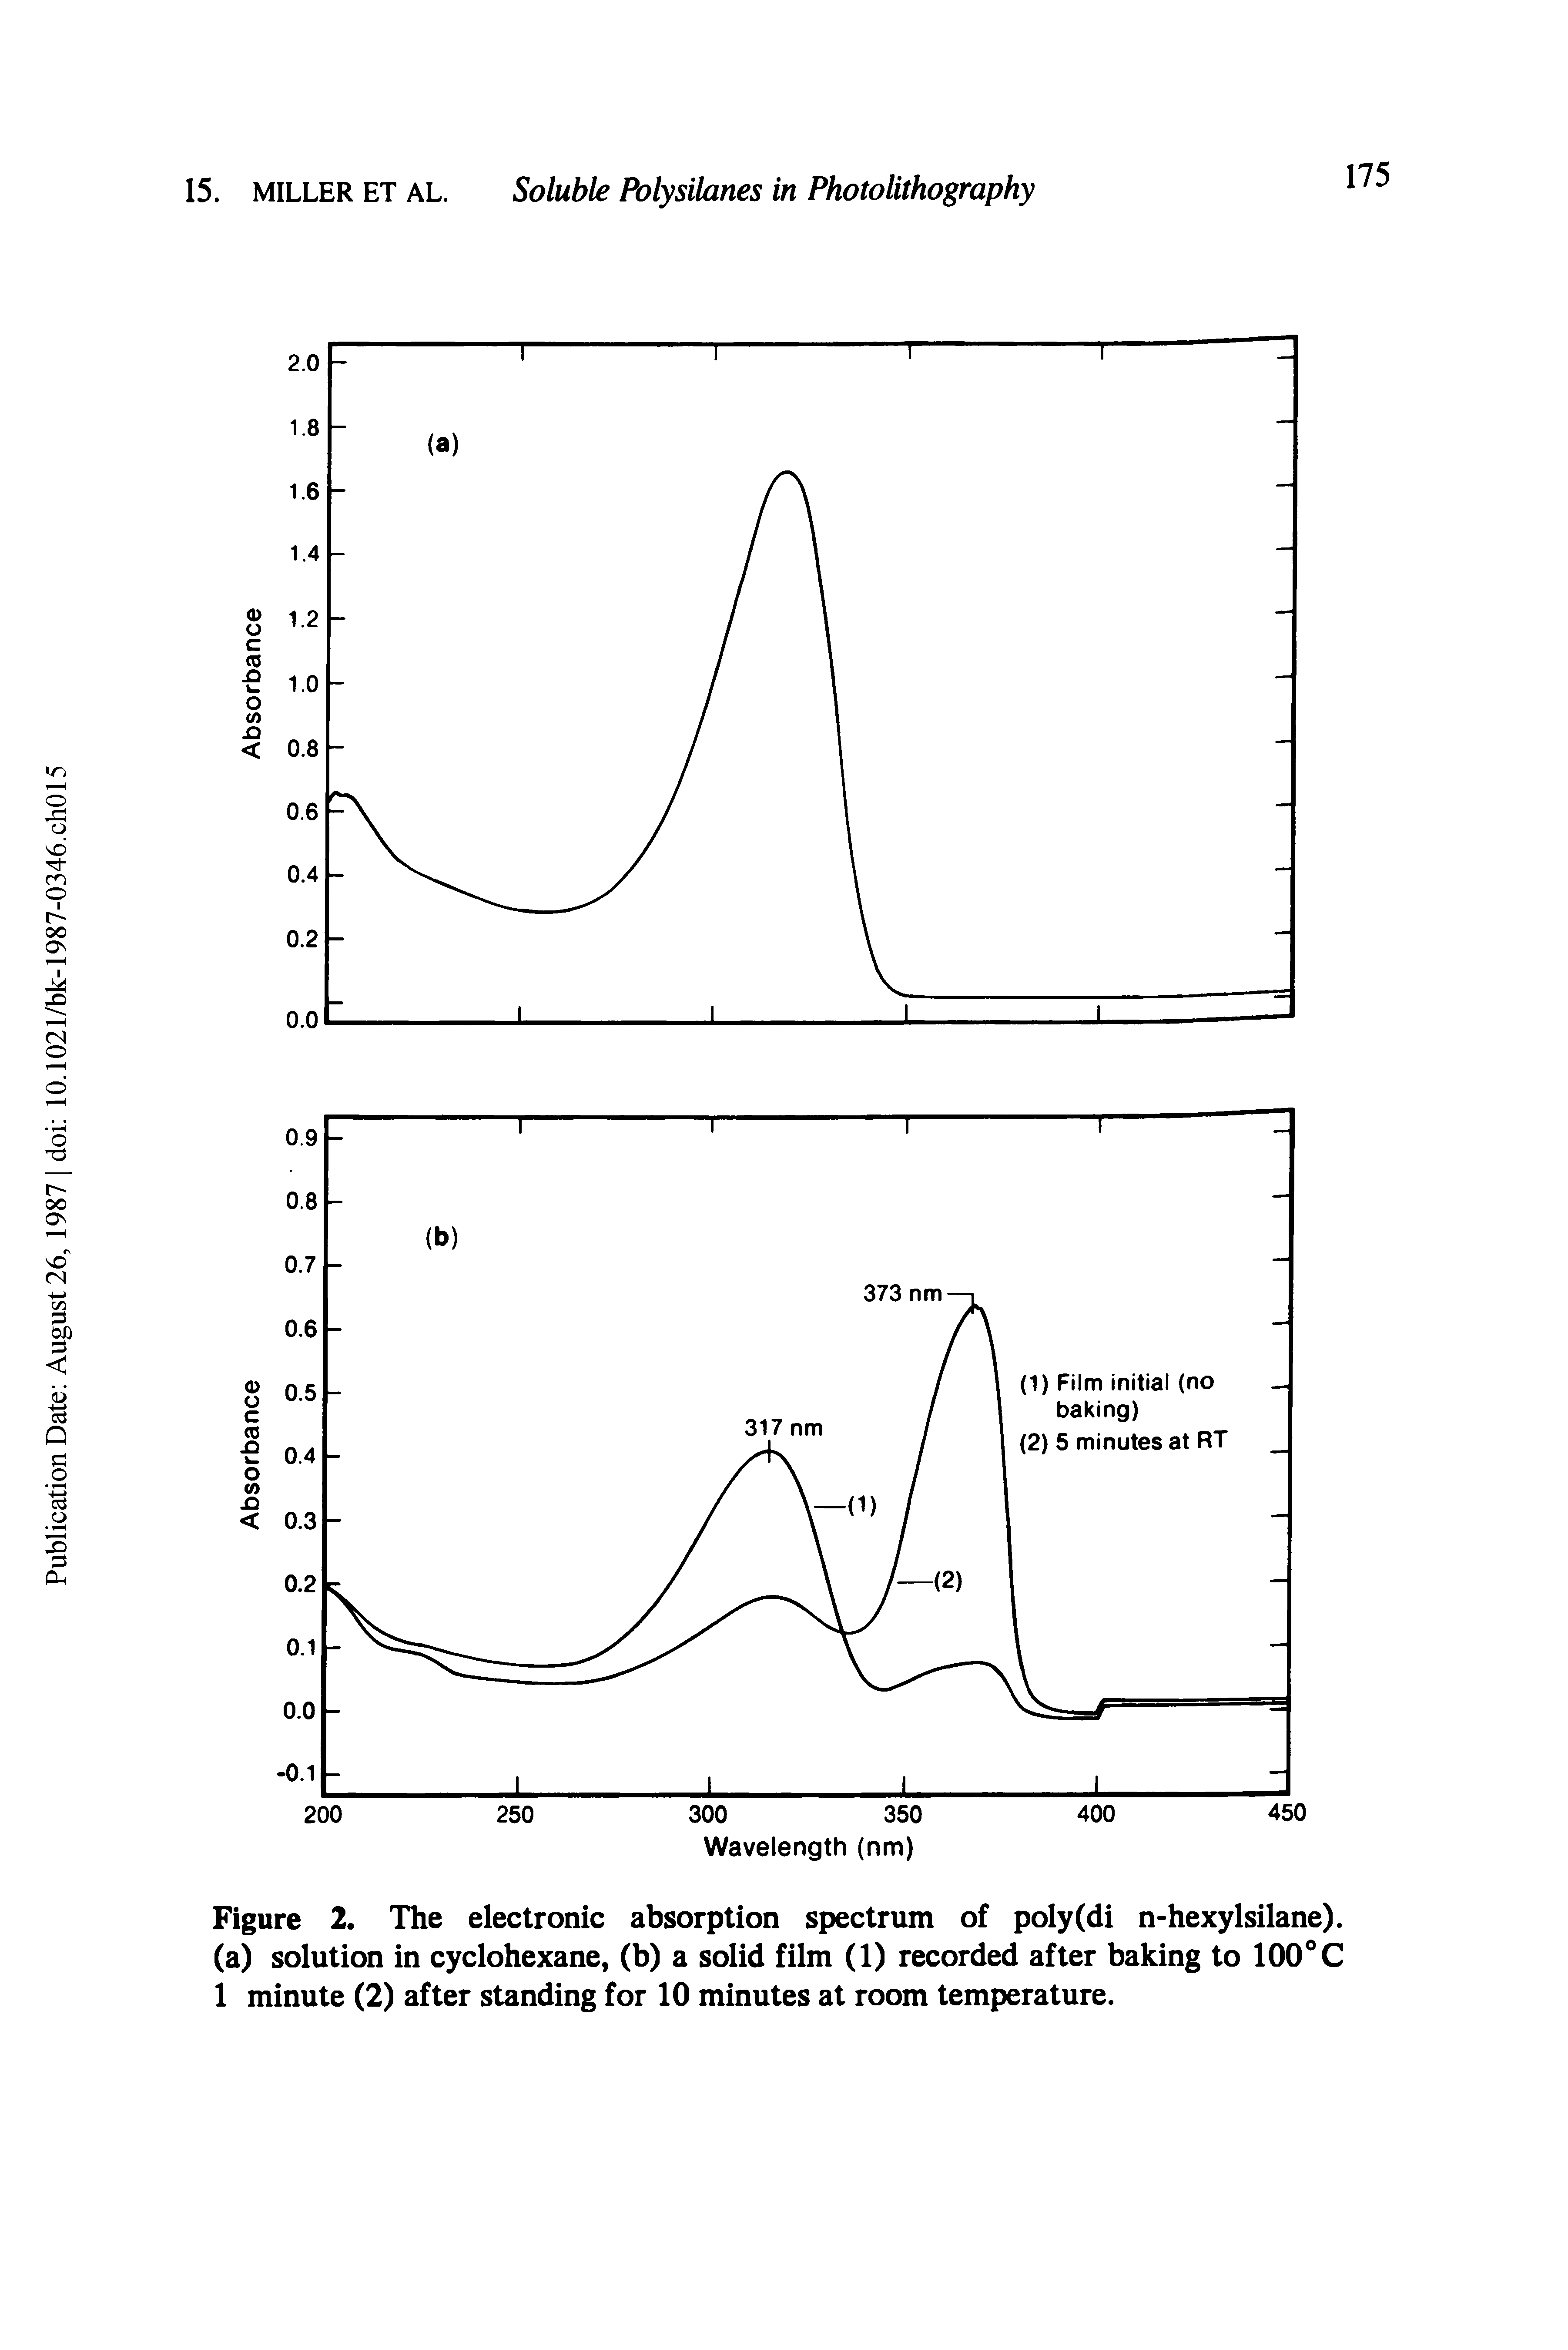 Figure 2. The electronic absorption spectrum of poly(di n-hexylsilane). (a) solution in cyclohexane, (b) a solid film (1) recorded after baking to 100 C 1 minute (2) after standing for 10 minutes at room temperature.